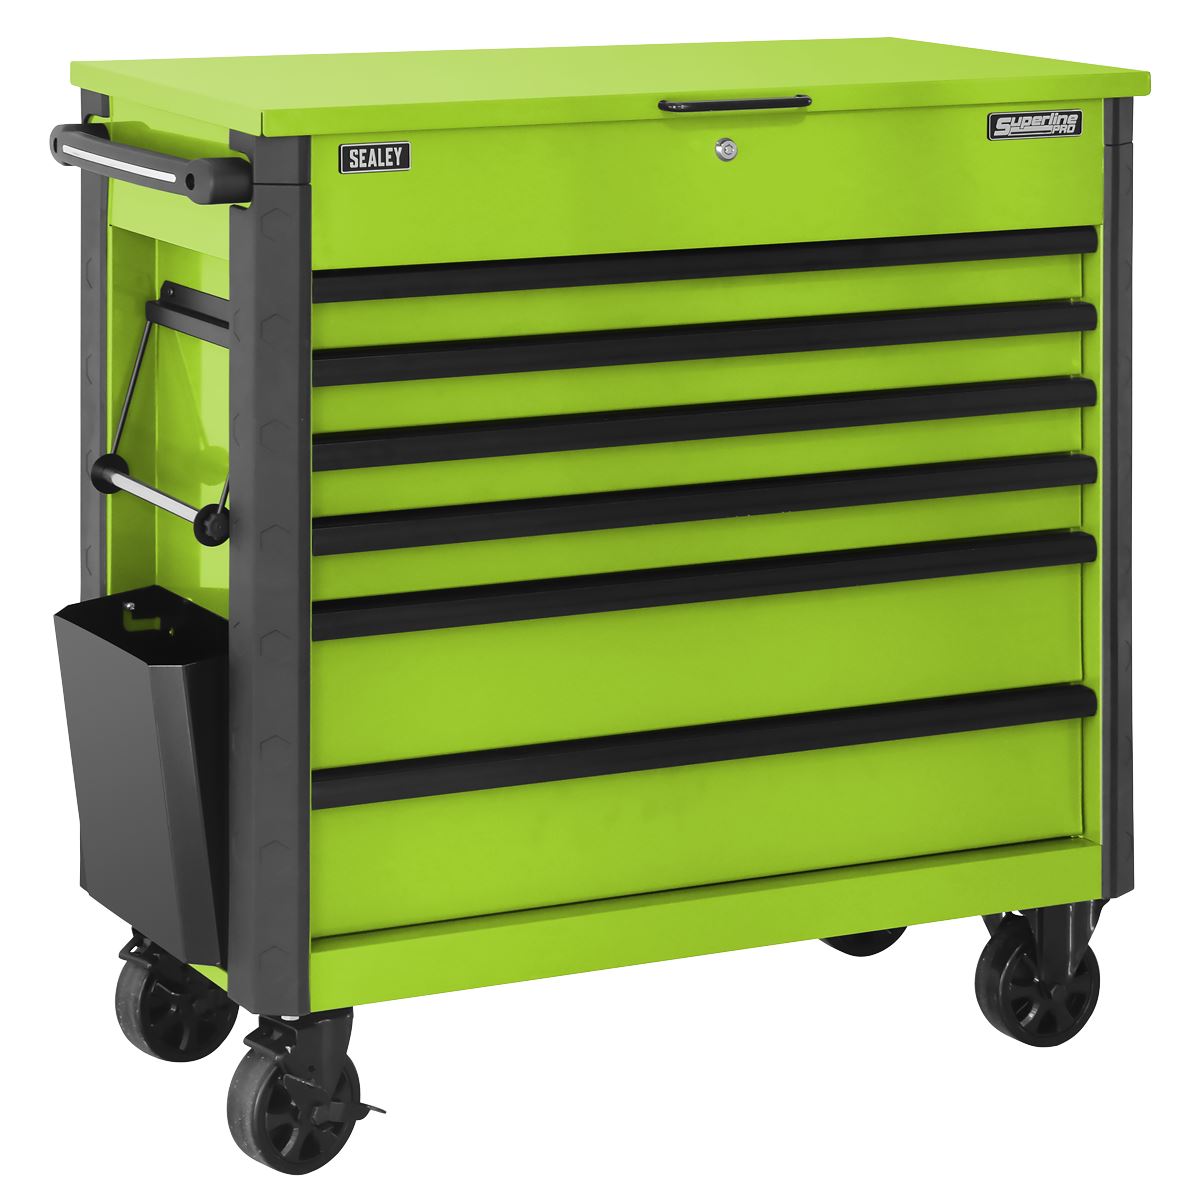 Sealey Superline Pro Tool Trolley 6 Drawer with Ball Bearing Slides - Green